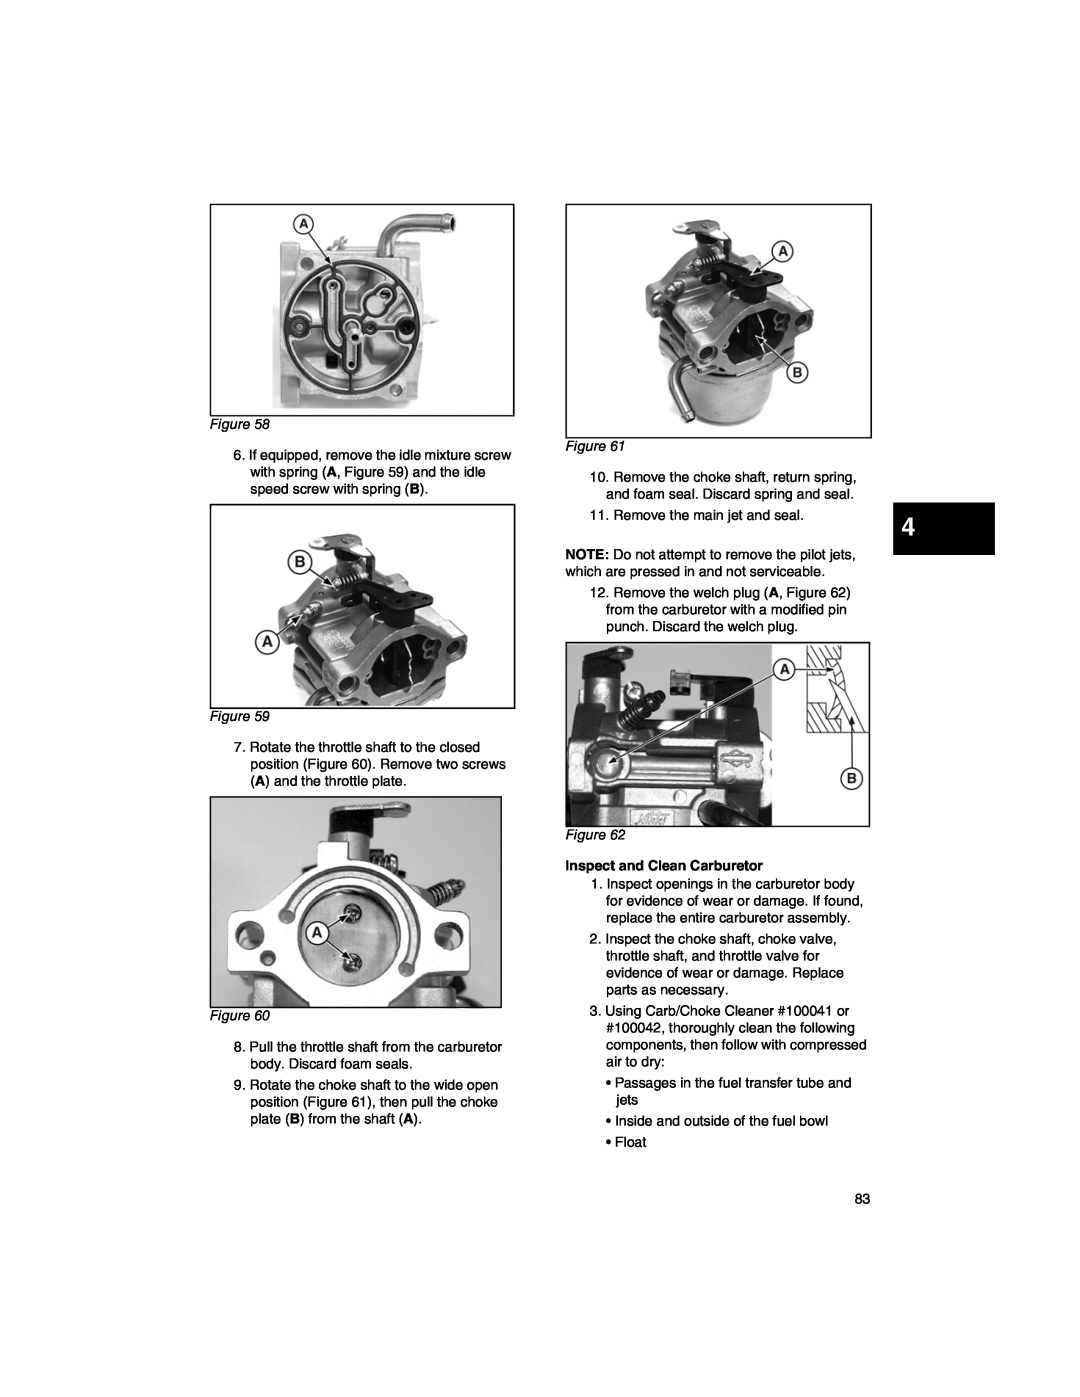 Briggs & Stratton 270962, 271172, CE8069, 276535, 273521 manual Remove the main jet and seal, Inspect and Clean Carburetor 